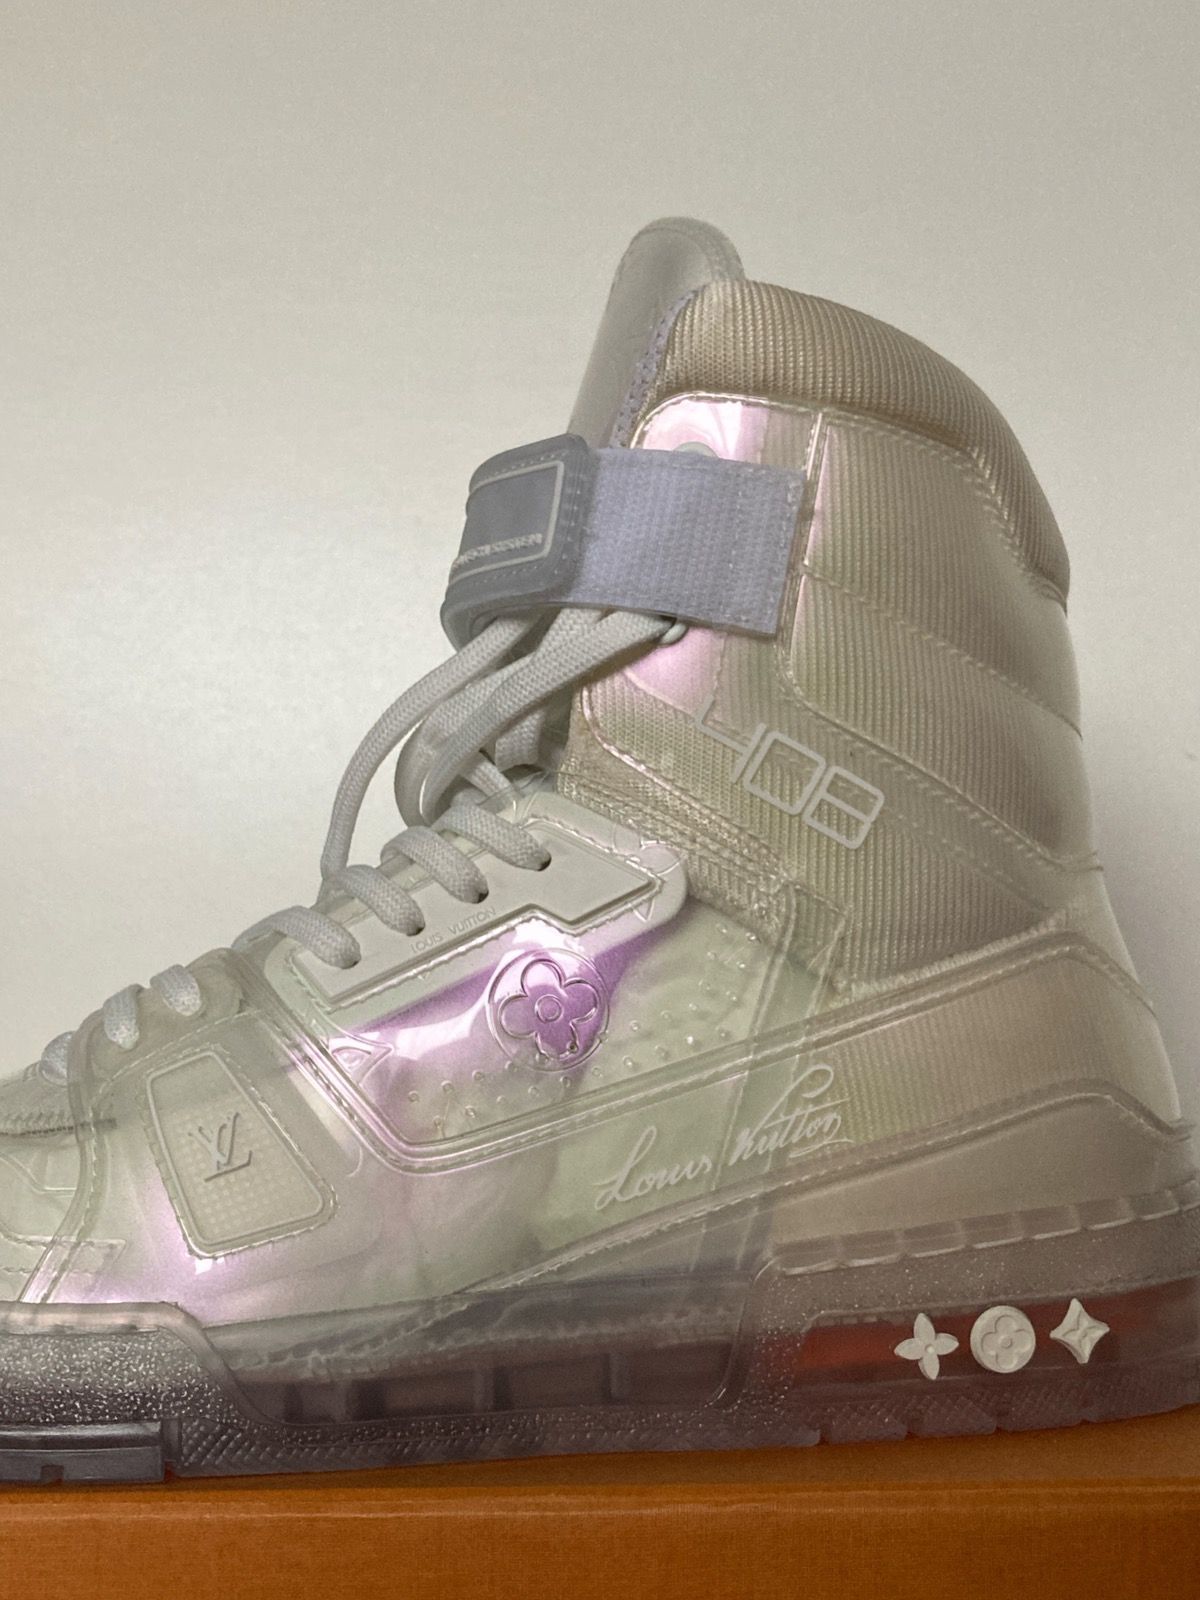 Louis Vuitton References SS19 Luggage In Latest LV 408 Sneaker Hightop Drop